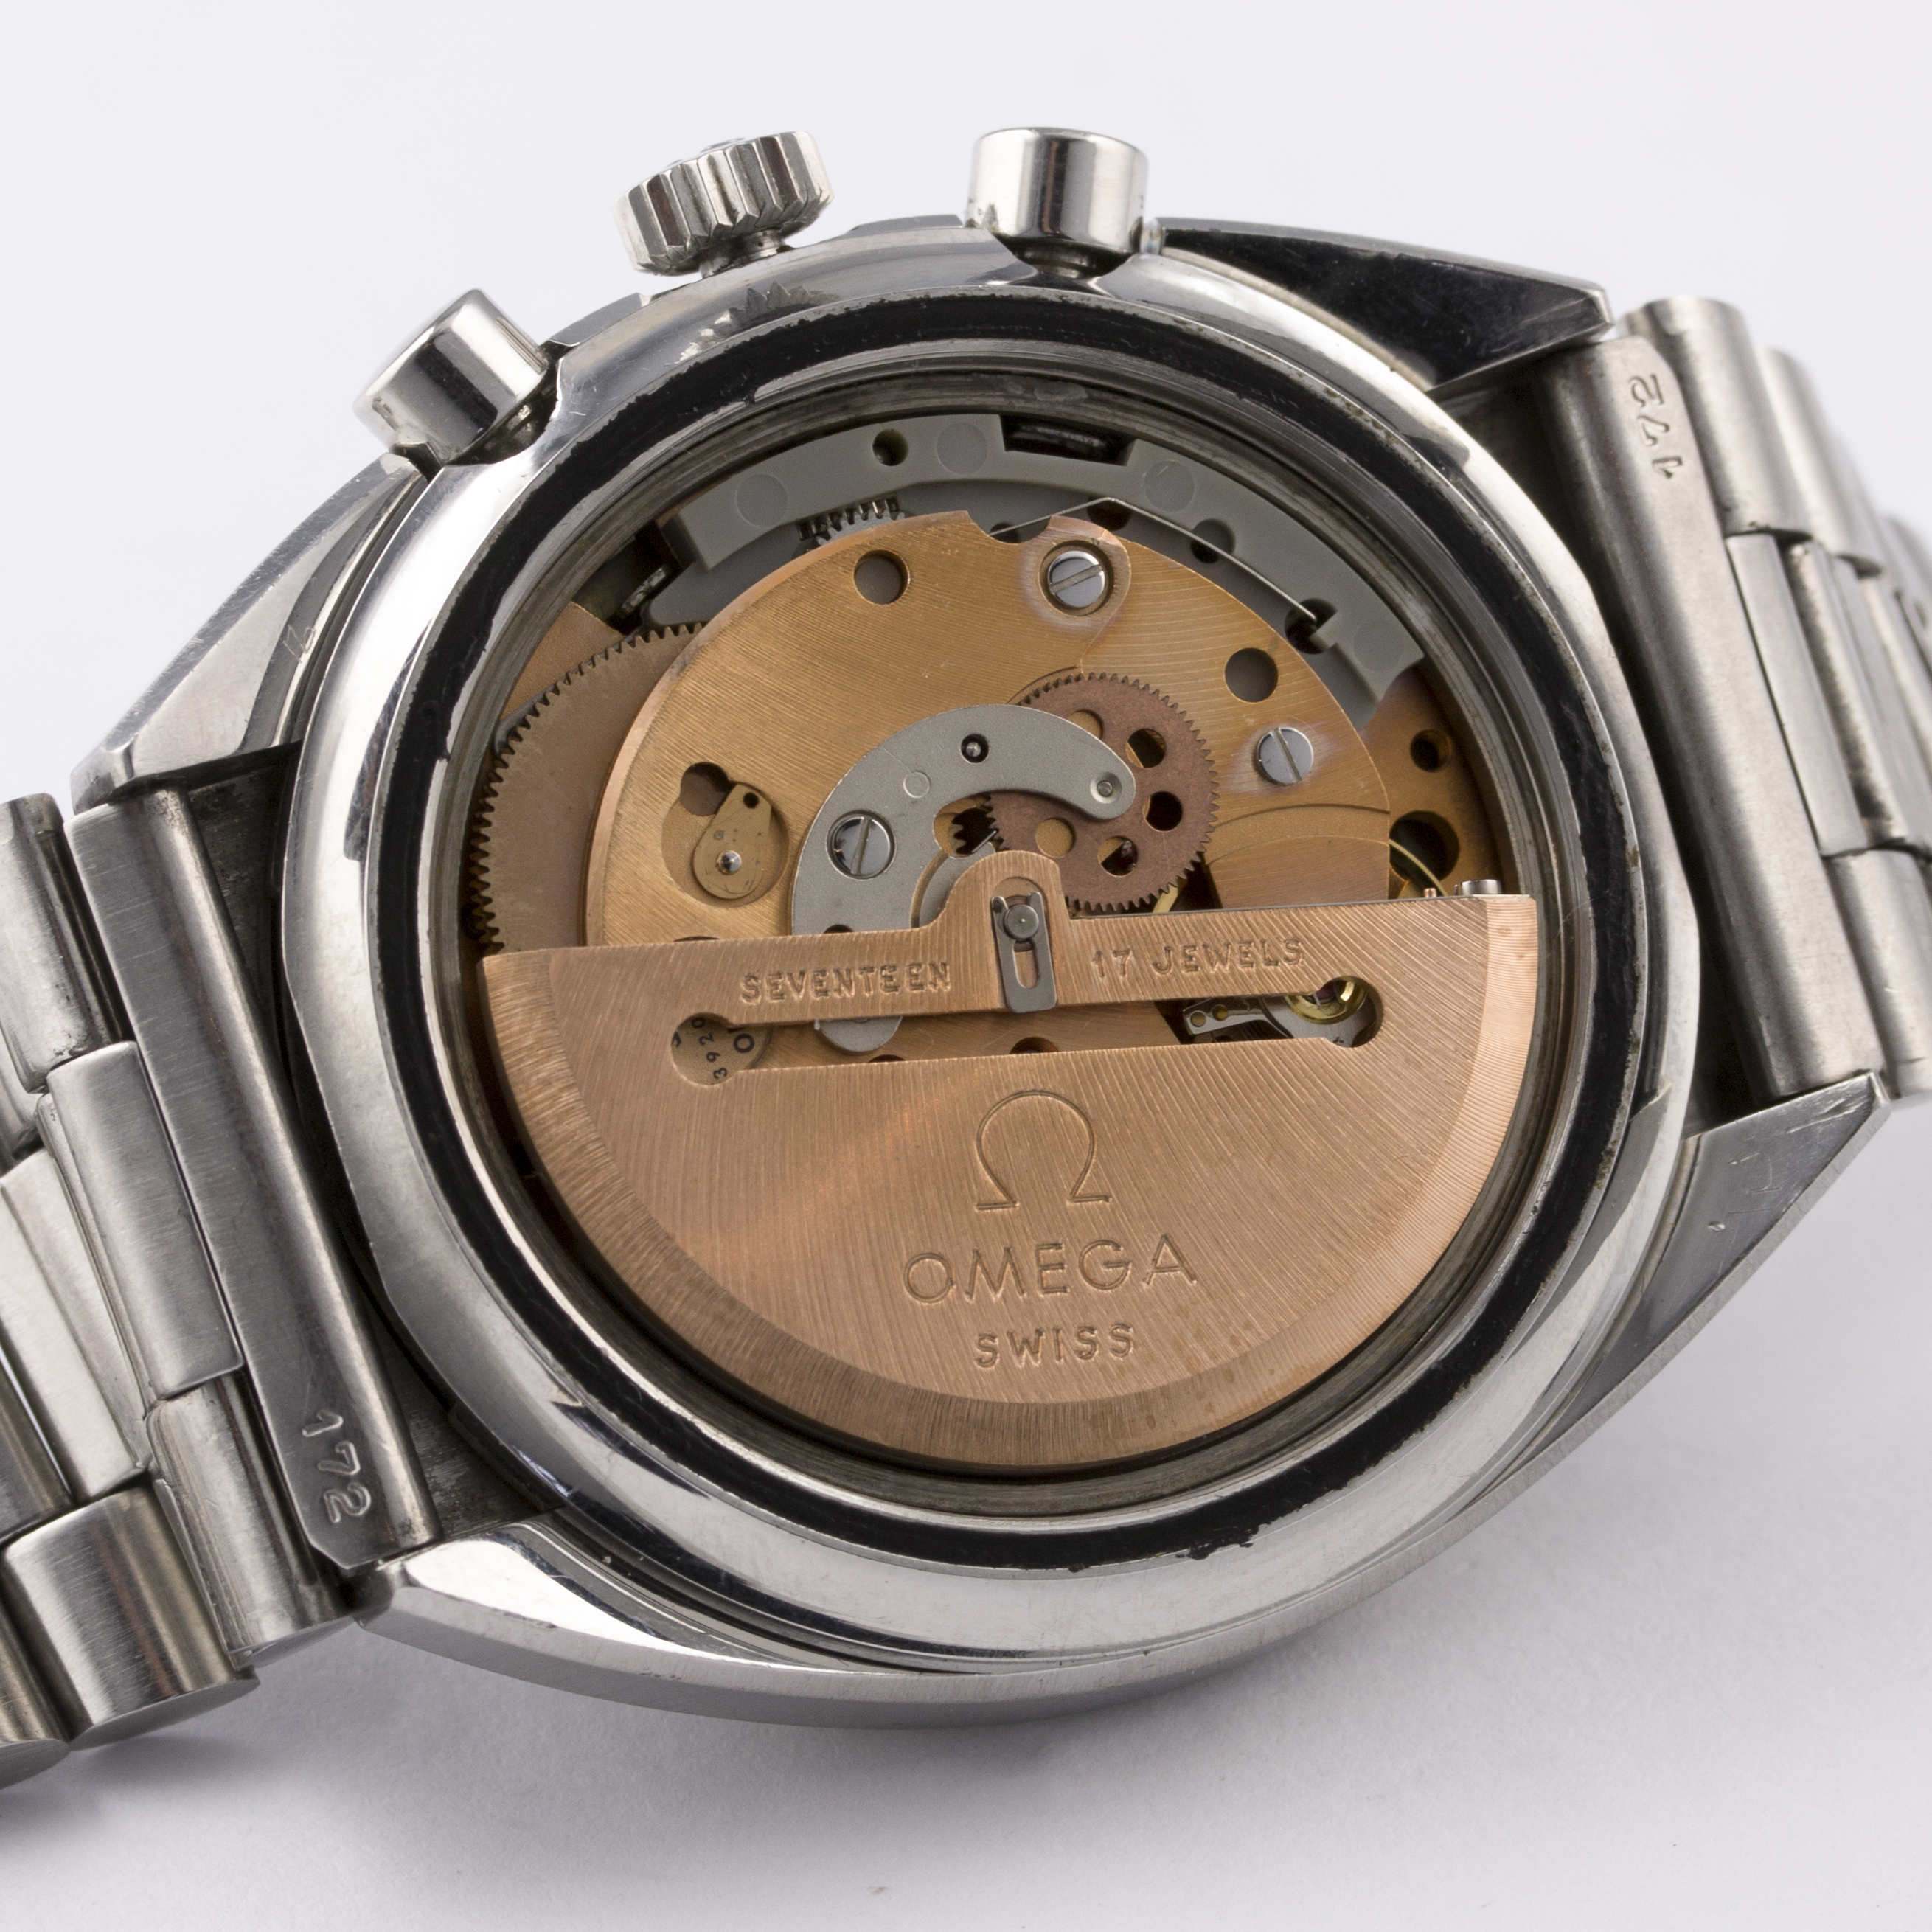 A GENTLEMAN'S STAINLESS STEEL OMEGA SPEEDMASTER MARK 4.5 AUTOMATIC CHRONOGRAPH BRACELET WATCH - Image 8 of 9